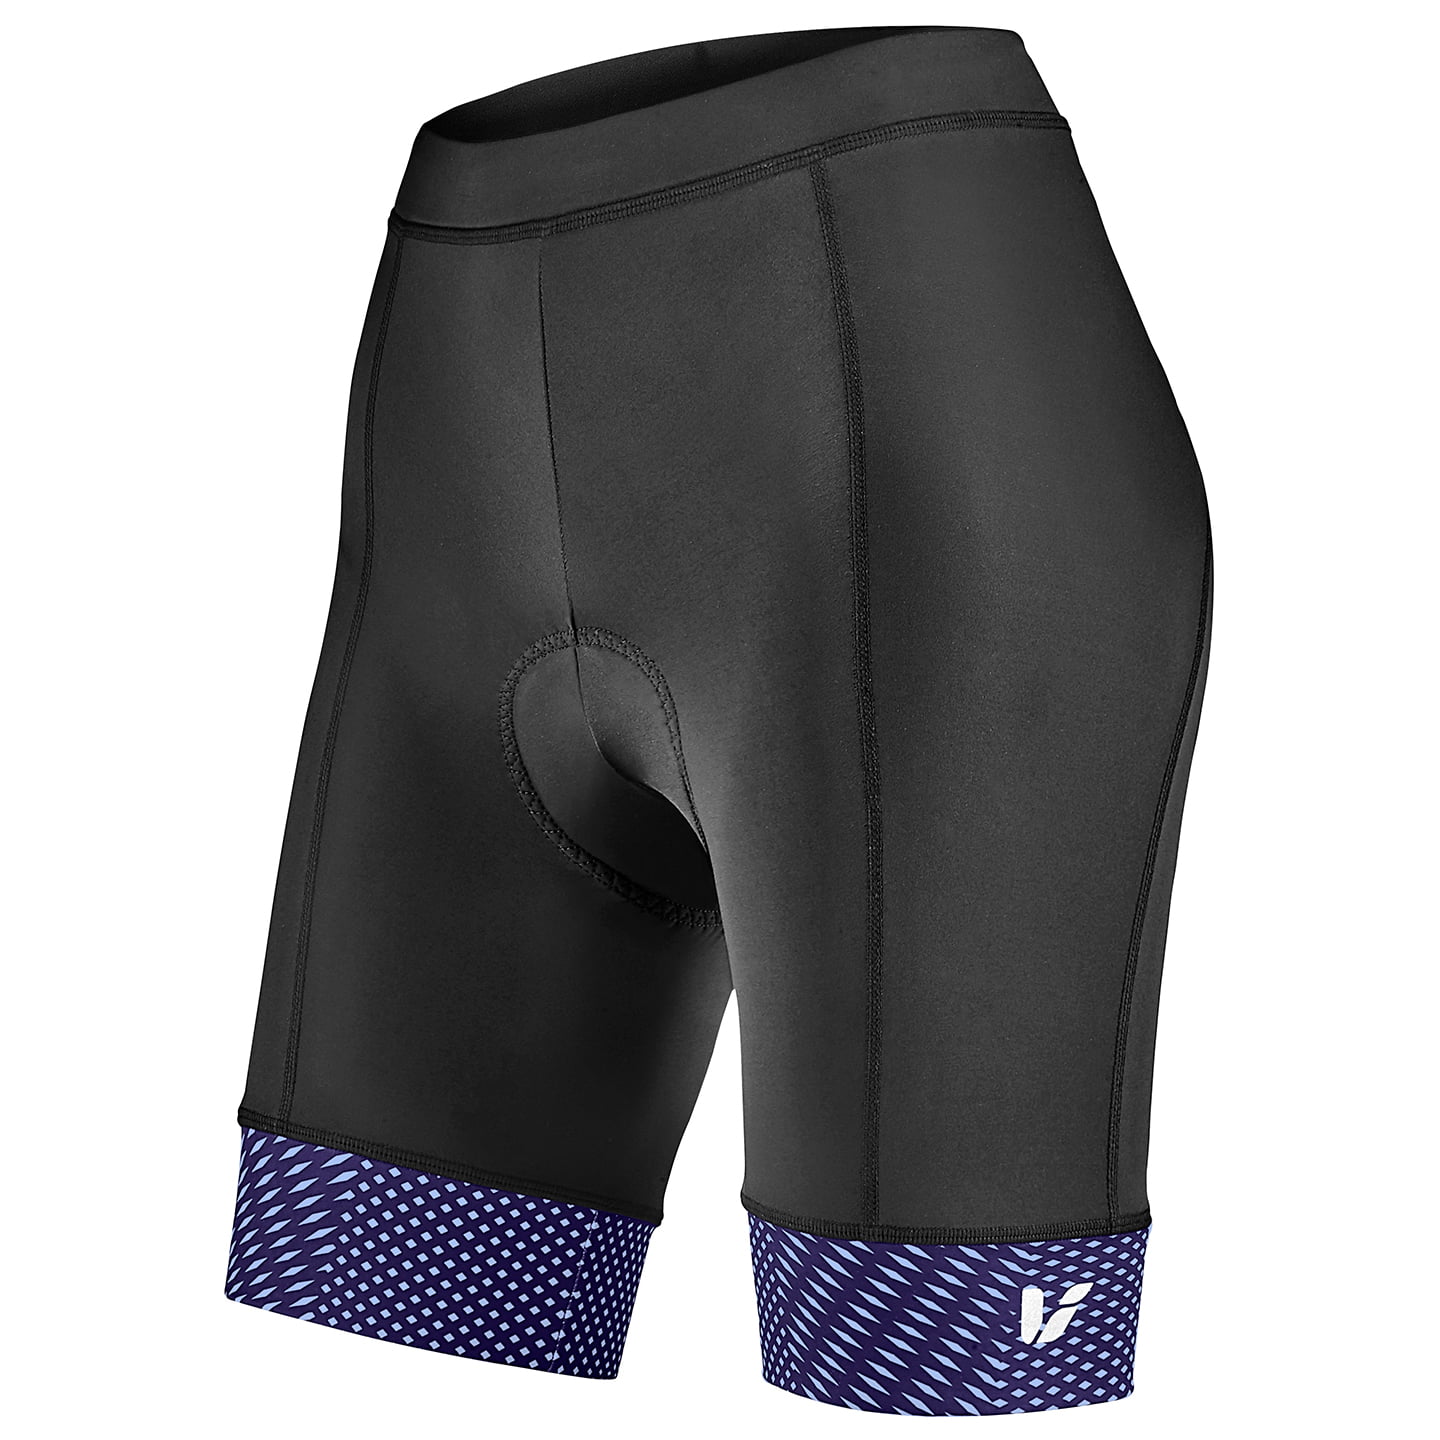 LIV Beliv Women’s Bike Shorts, size S, Cycle trousers, Cycle clothing